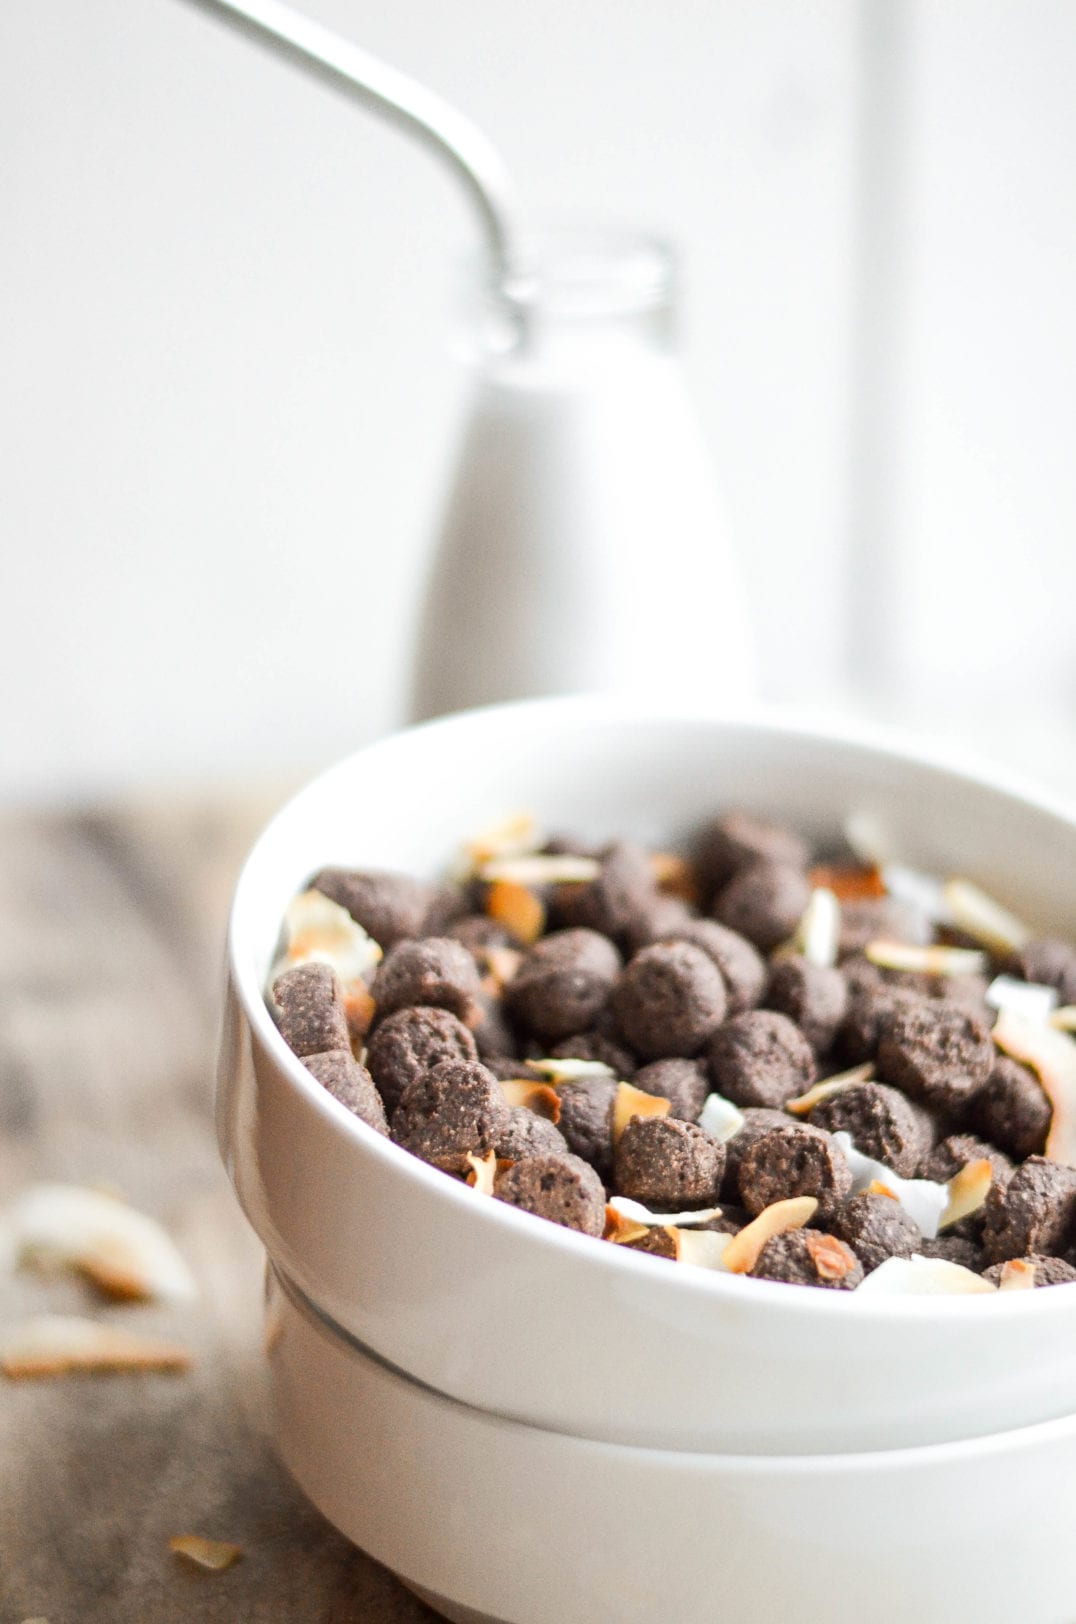 Whole Wheat Chocolate Coconut Cereal